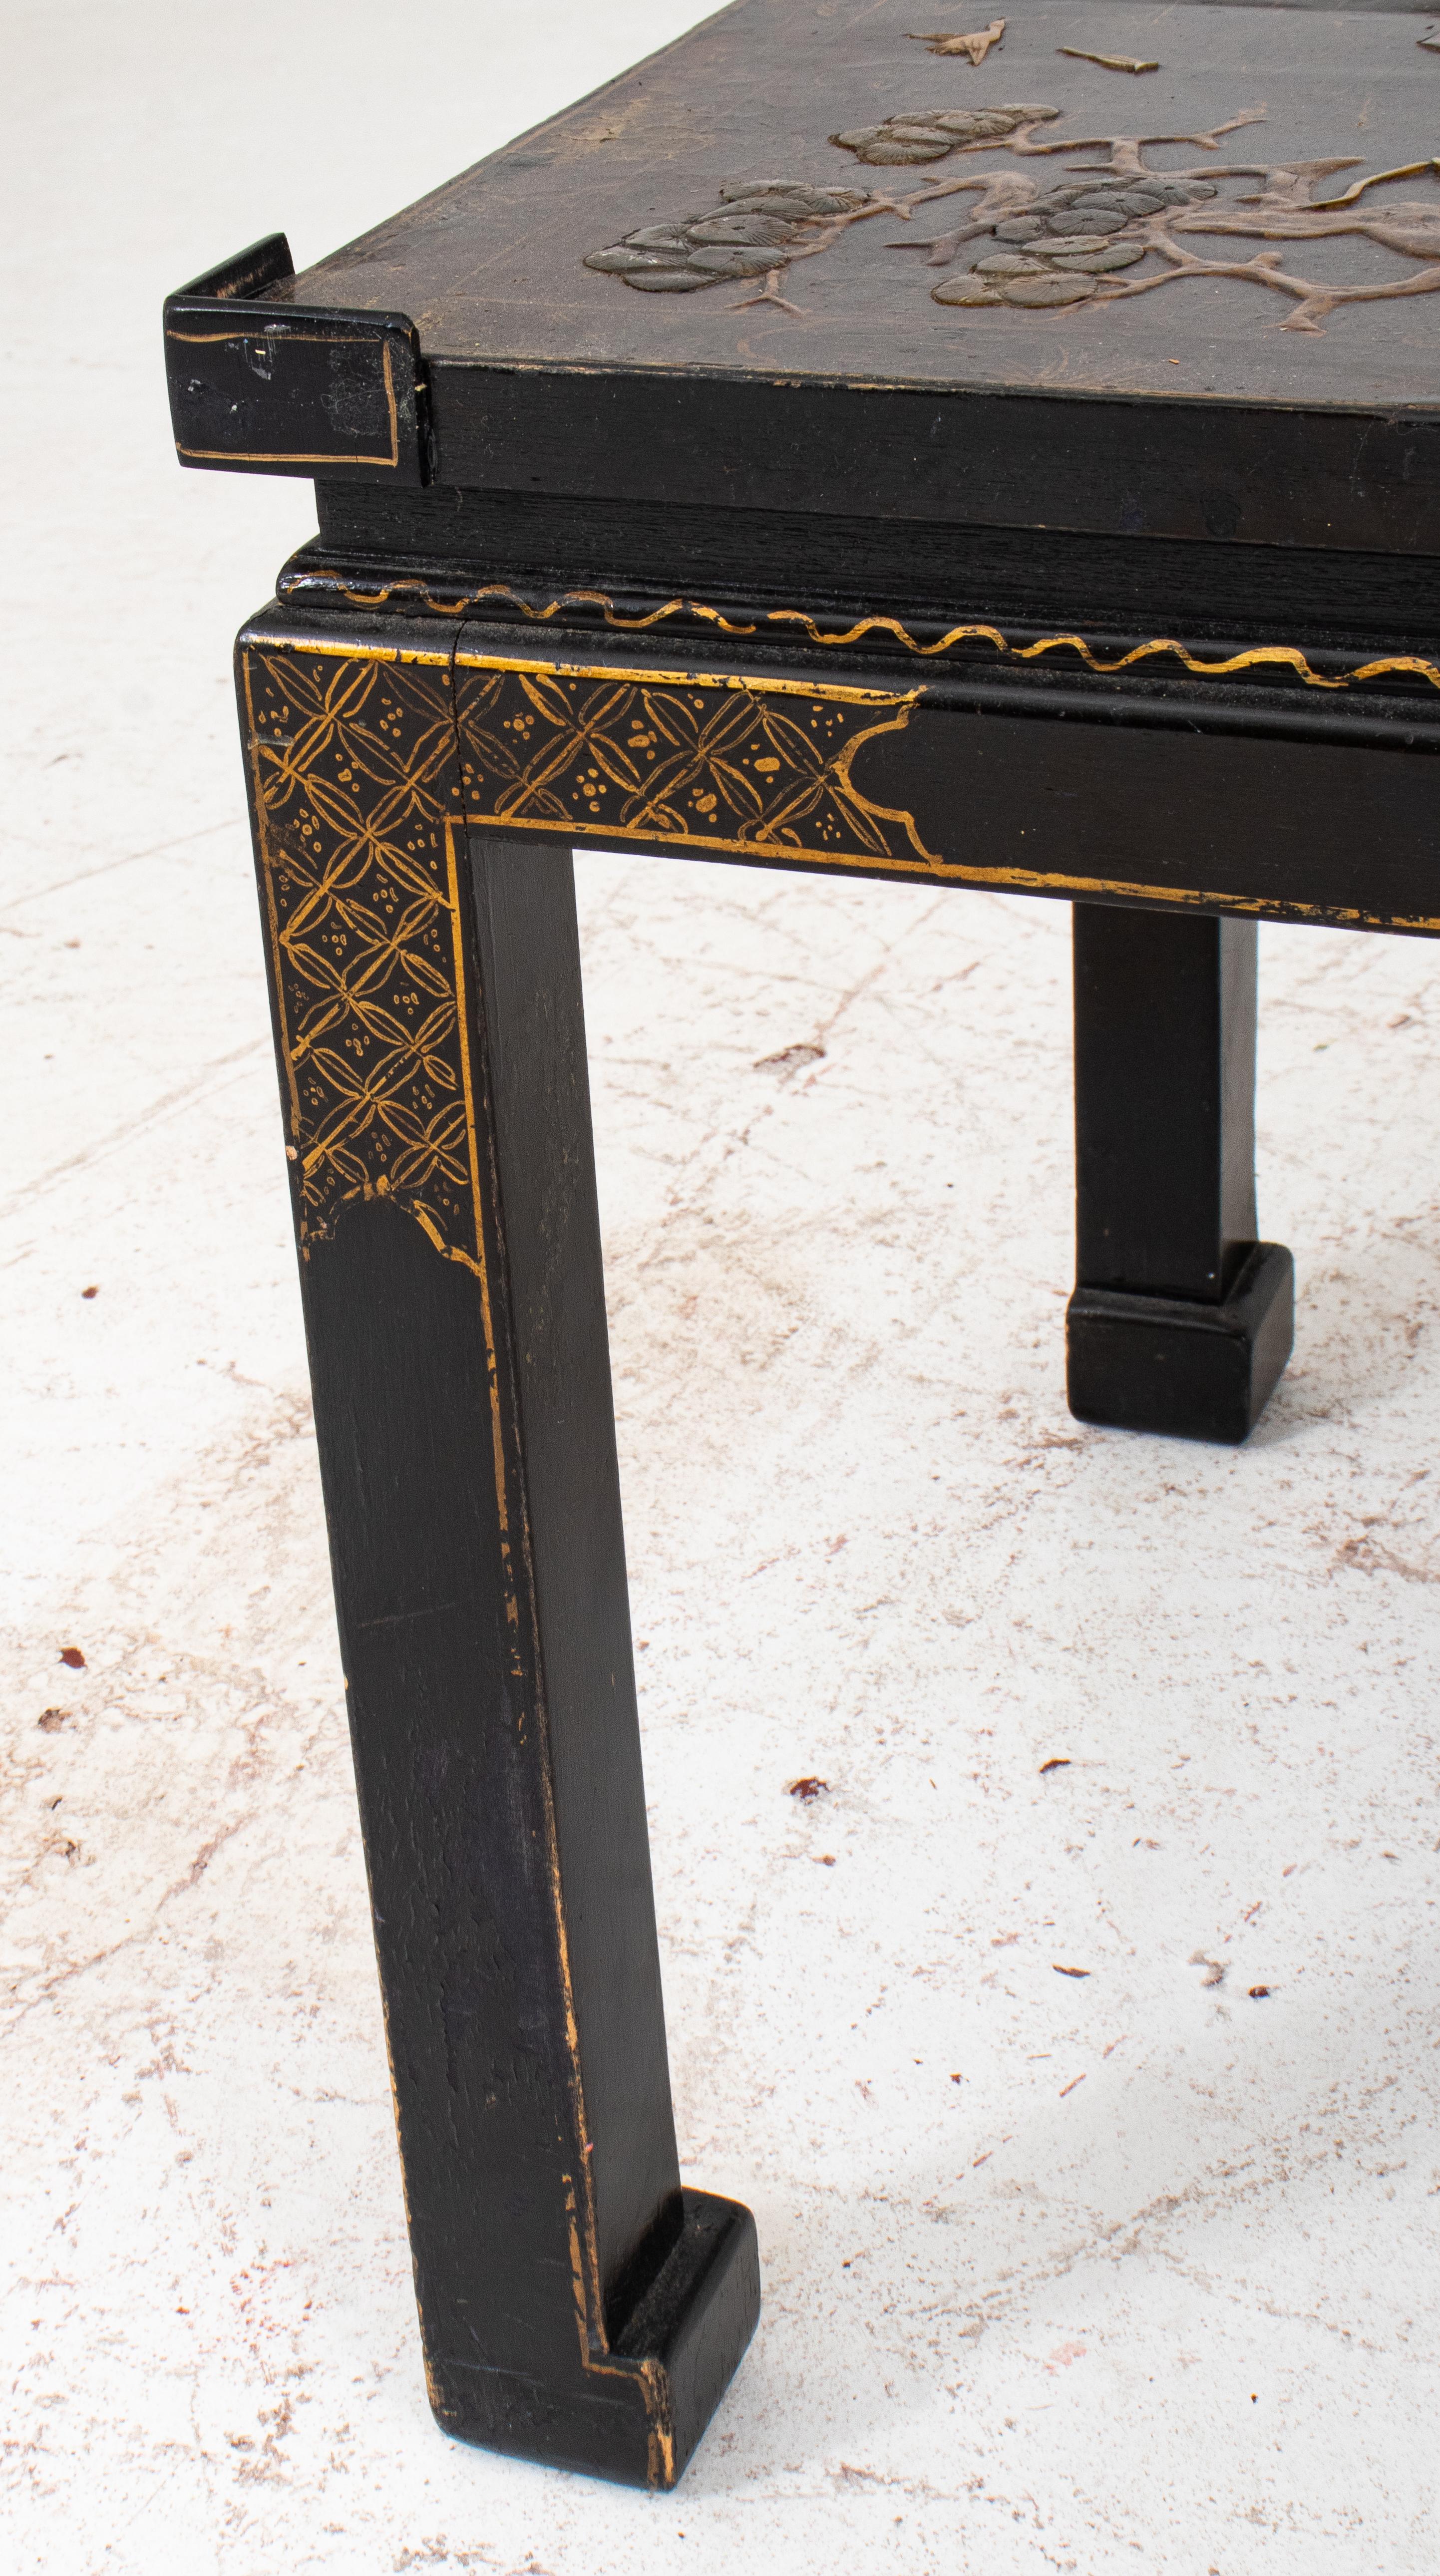 Chinese Hardstone Inlaid Panel Mounted as a Table 4